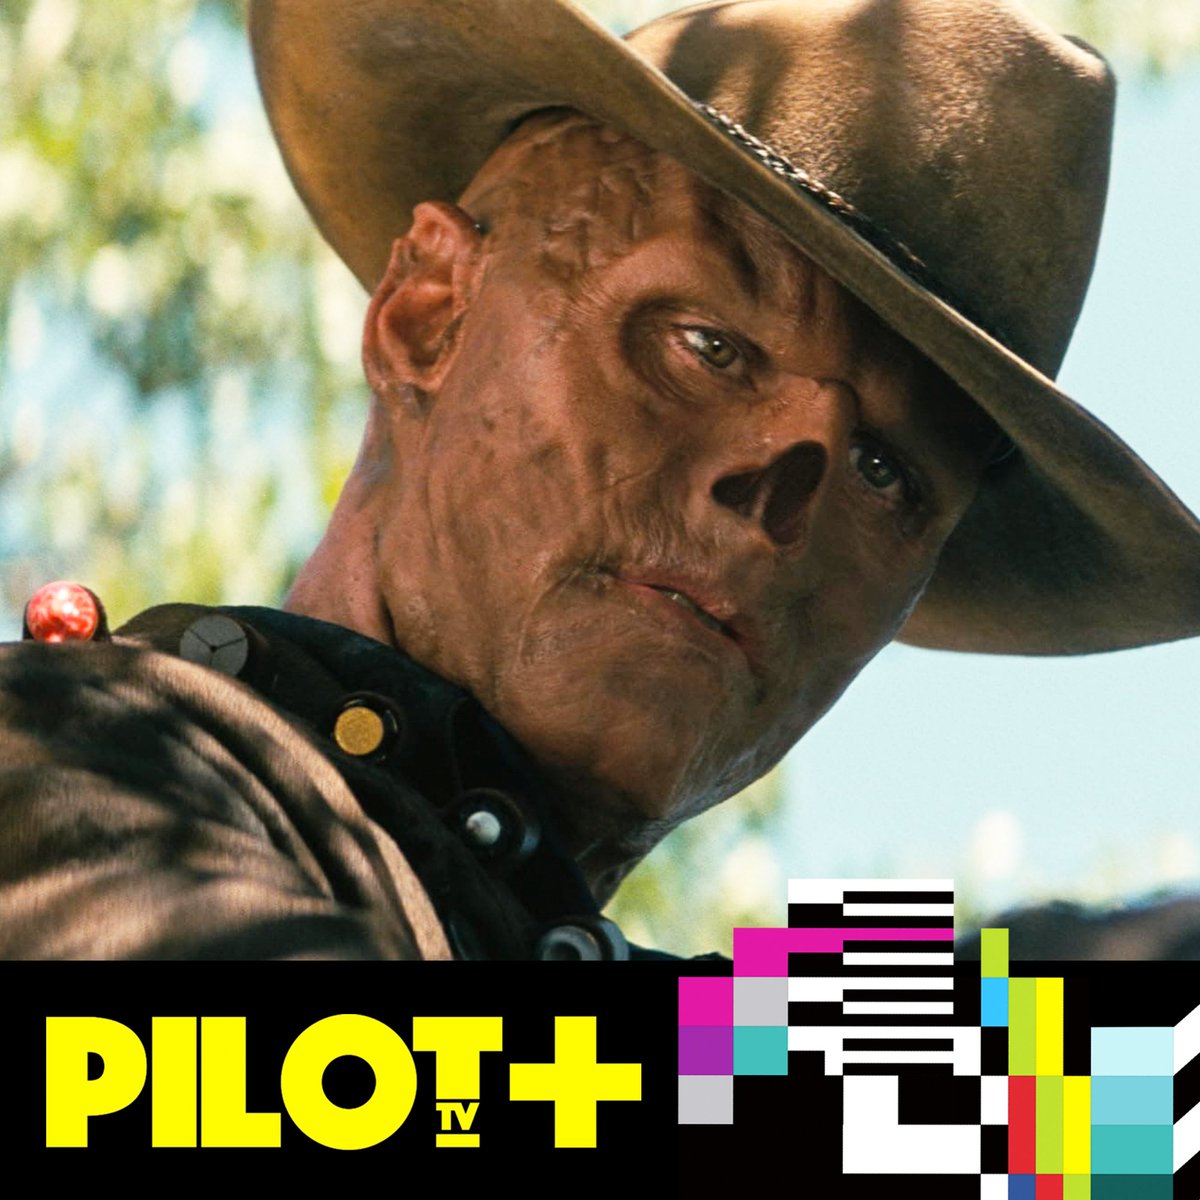 On the Pilot+ bonus episode this week, the team review Prime Video's post-apocalyptic game adaptation #Fallout. Plus, cake chat, and @boydhilton does a one-man Spoiler Special for the Curb Your Enthusiasm finale! Subscribe to listen: empireonline.com/pilottv/